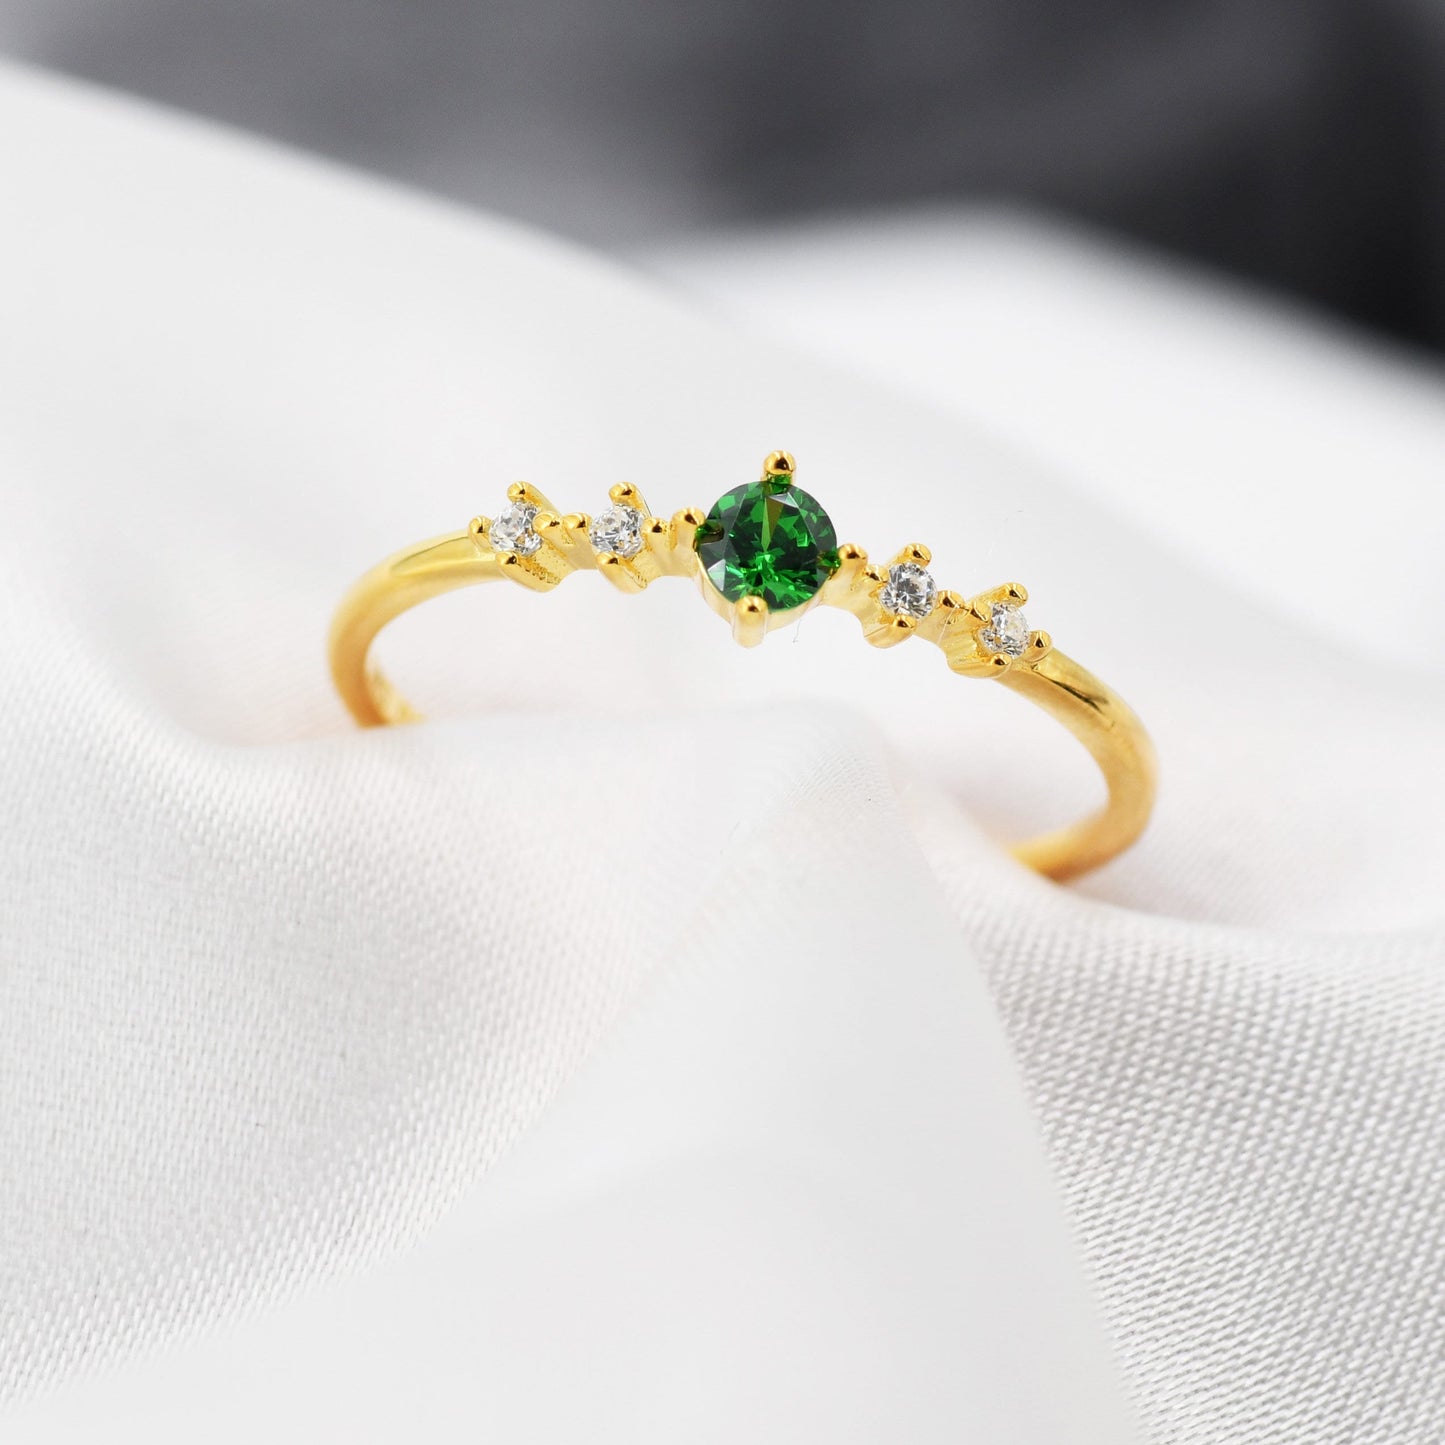 Vintage Style Emerald Green CZ Ring in Sterling Silver, Marquise Ring, Delicate Emerald Ring, Size US 5 - 8